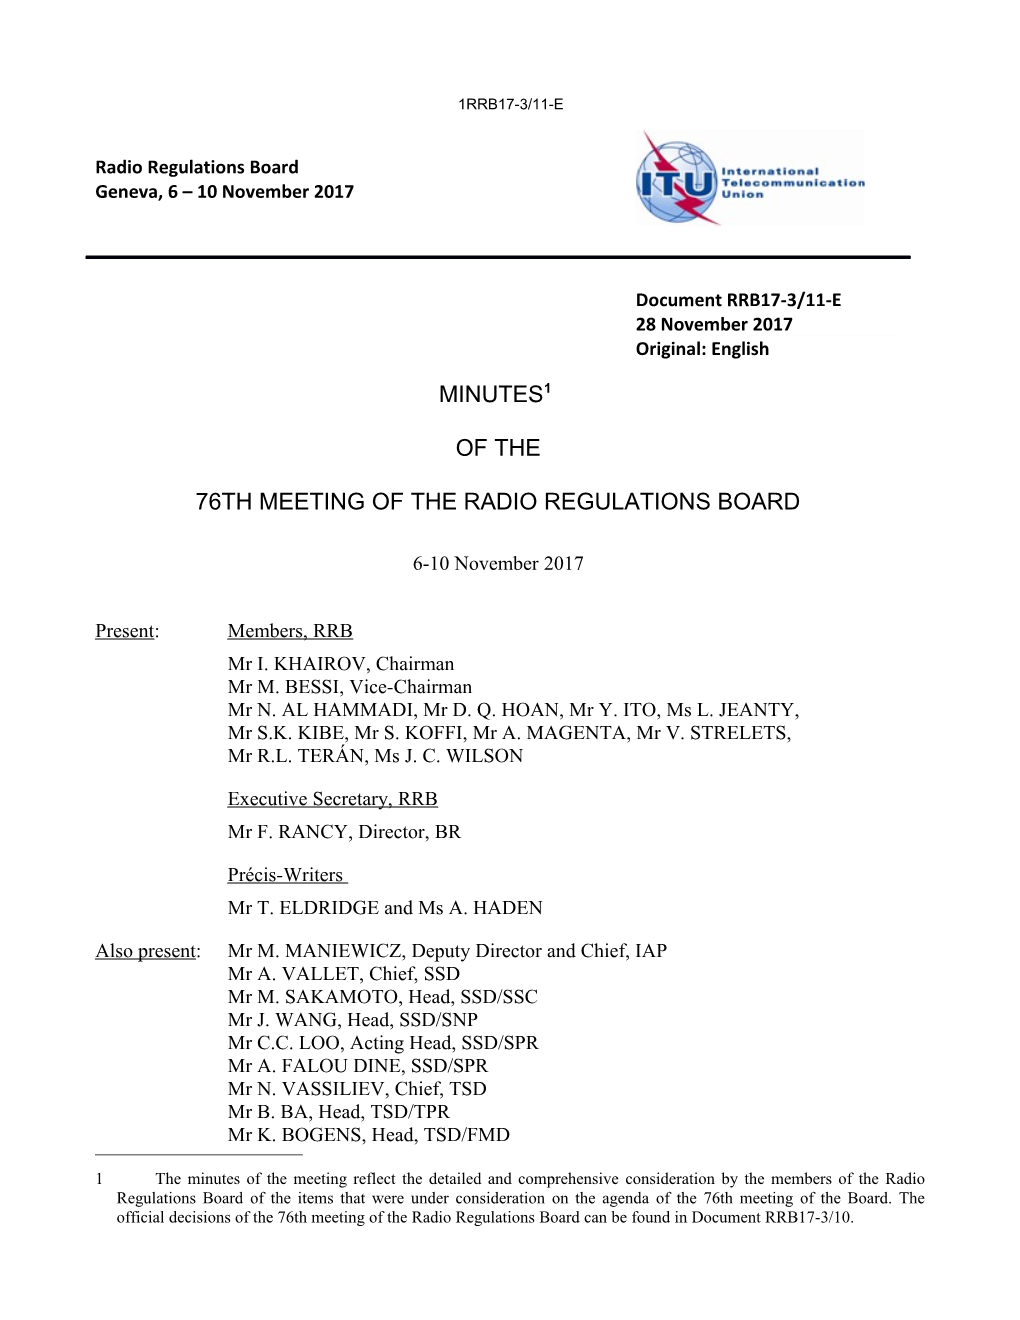 Minutes of the 76Th RRB Meeting (6-10 November 2017)